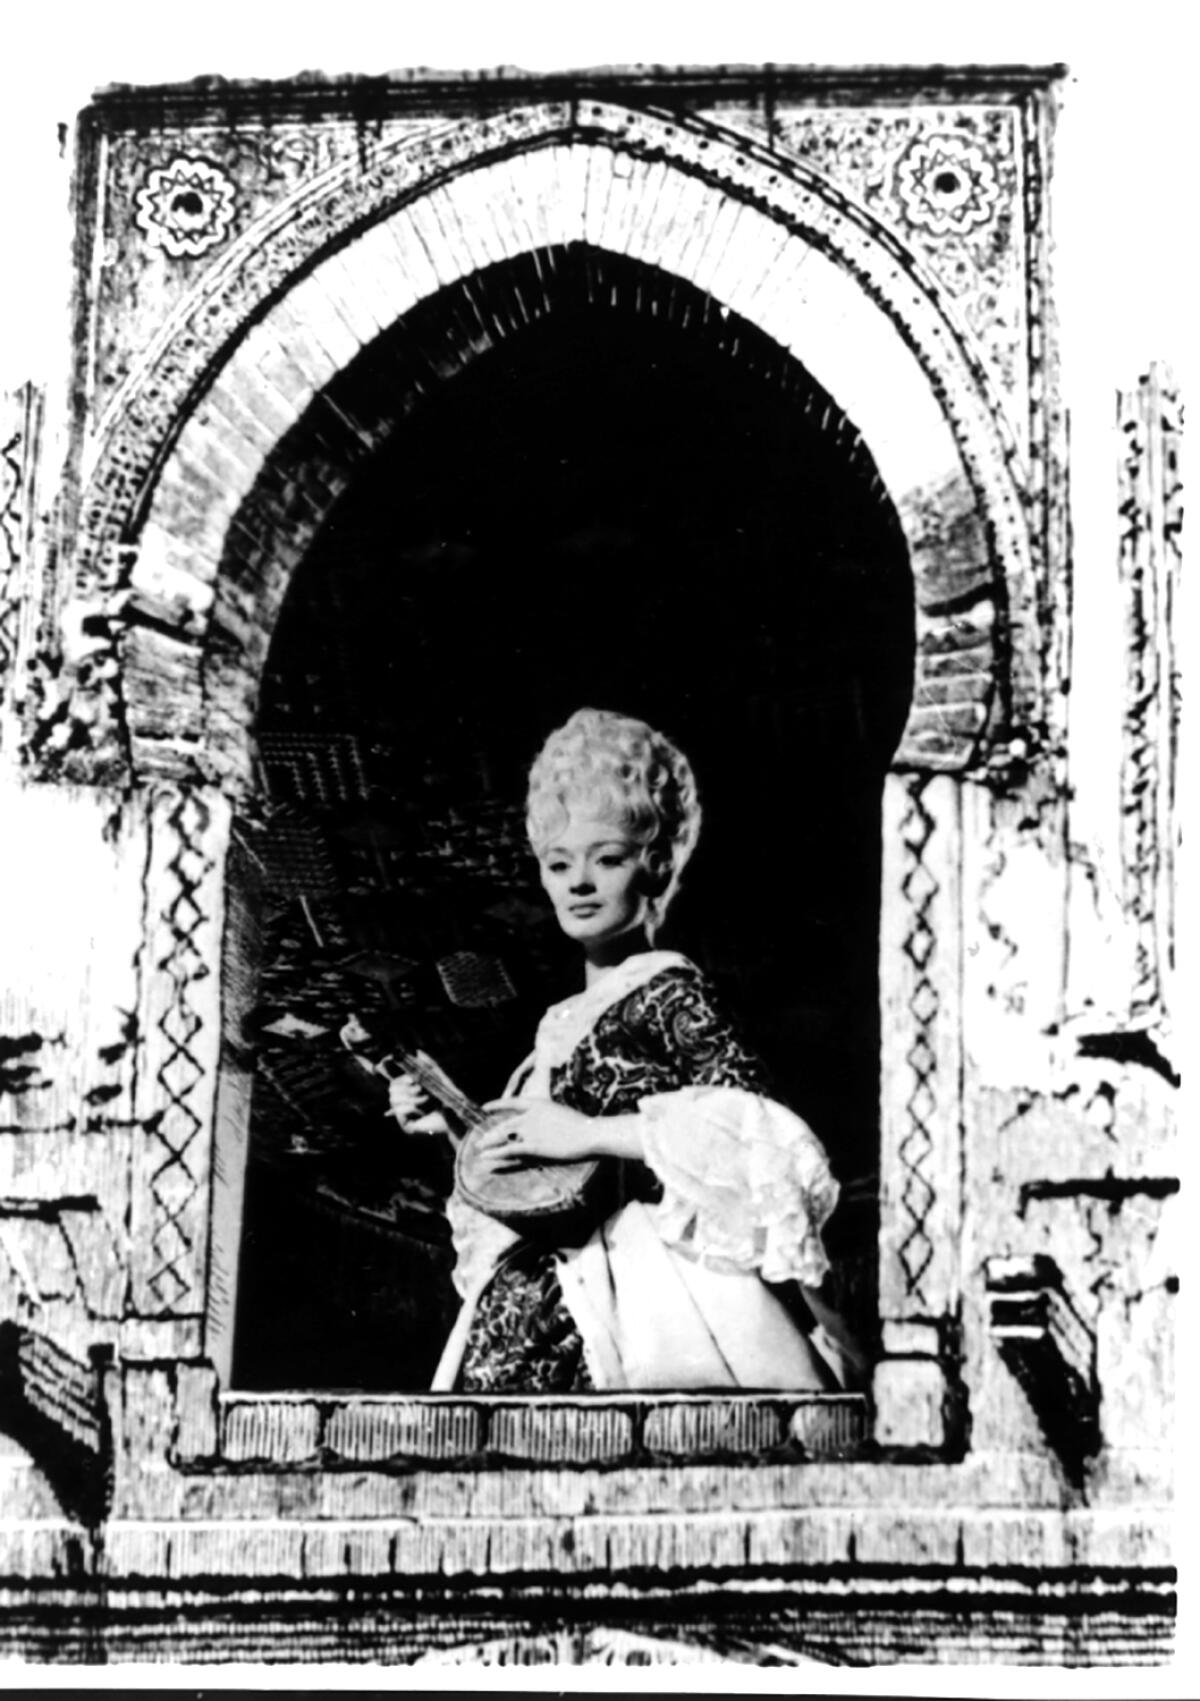 A black-and-white photo of a woman with an ornate hairdo holding an instrument in an arched window